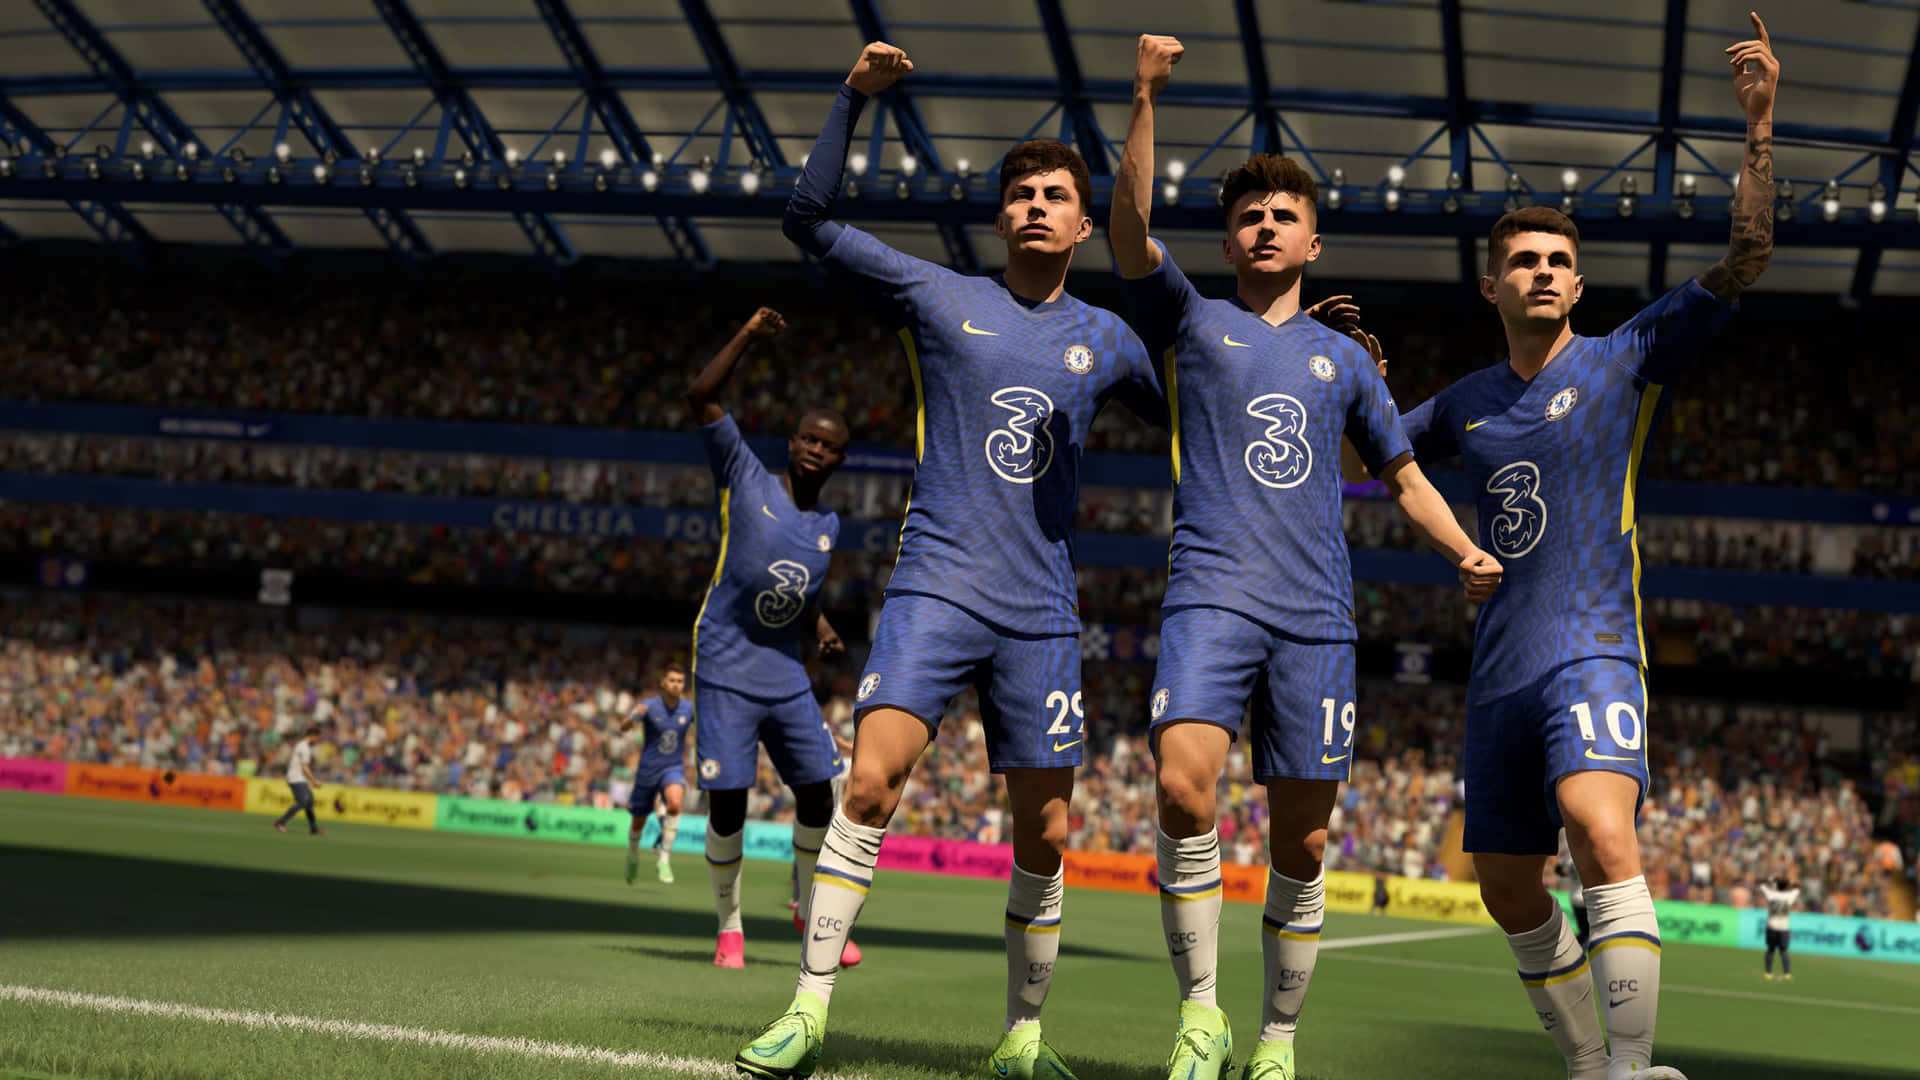 Exciting FIFA 22 Gameplay on Display Wallpaper